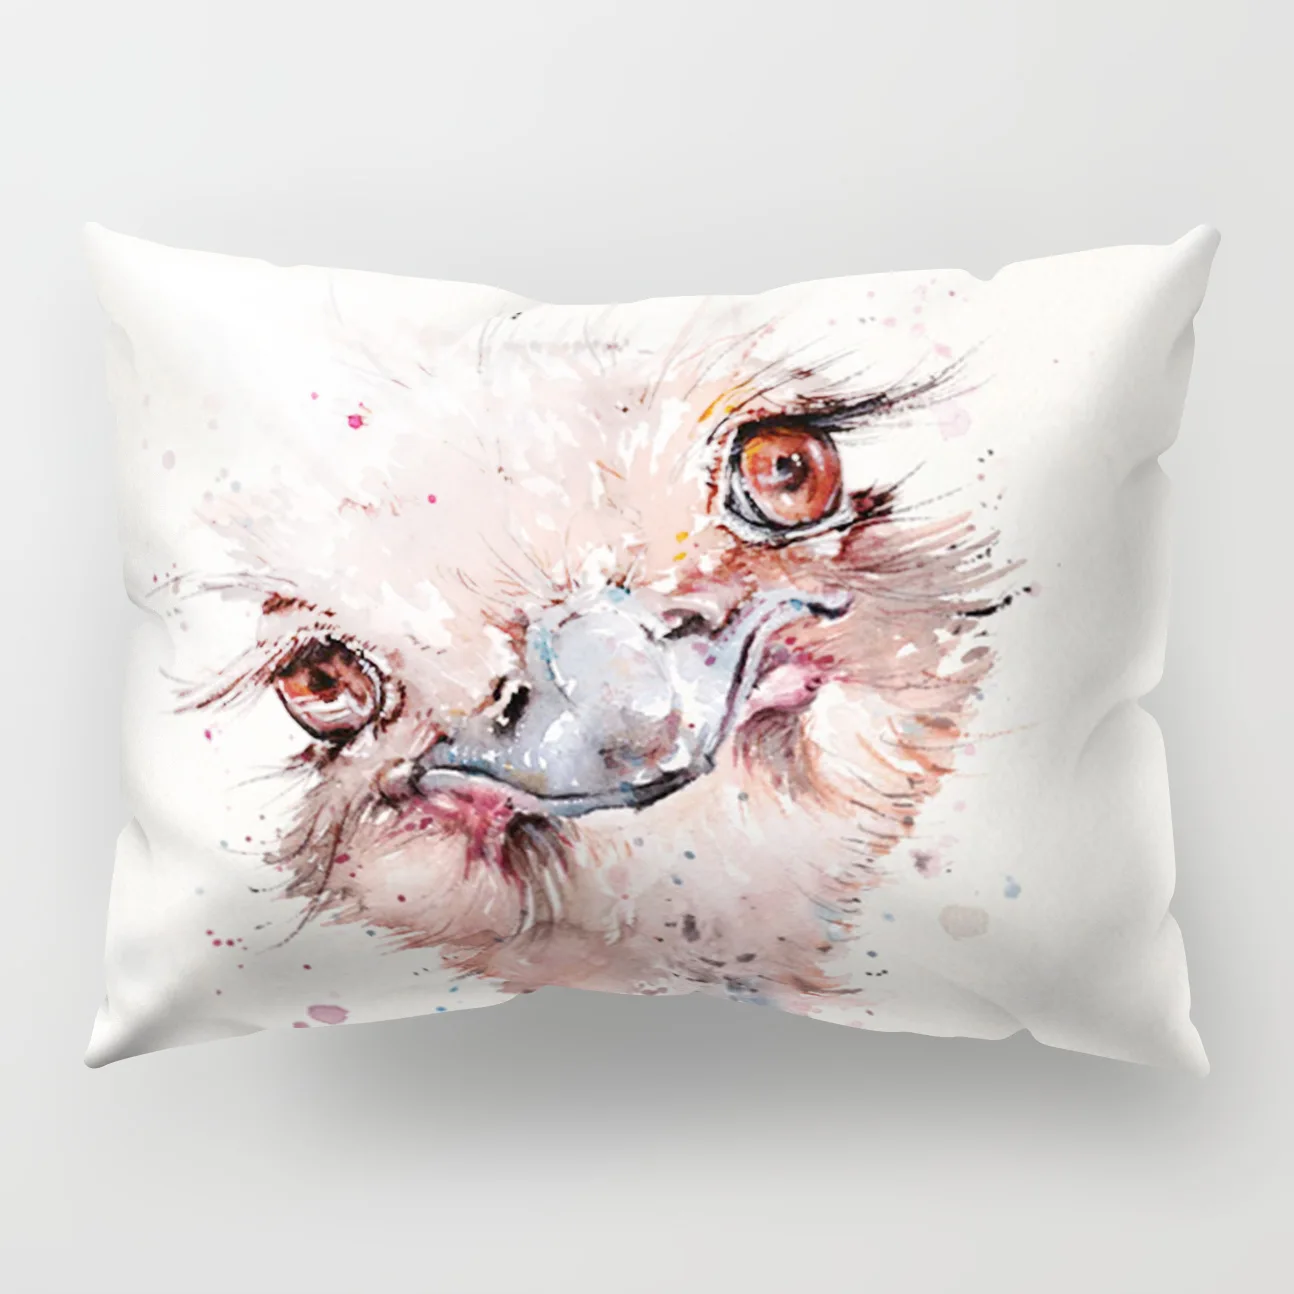 Watercolor Animal Polyester Cushion Cover Soft 30x50cm Cute Bird Owl Deer Print Decorative Pillow Case for Sofa Couch Home Decor